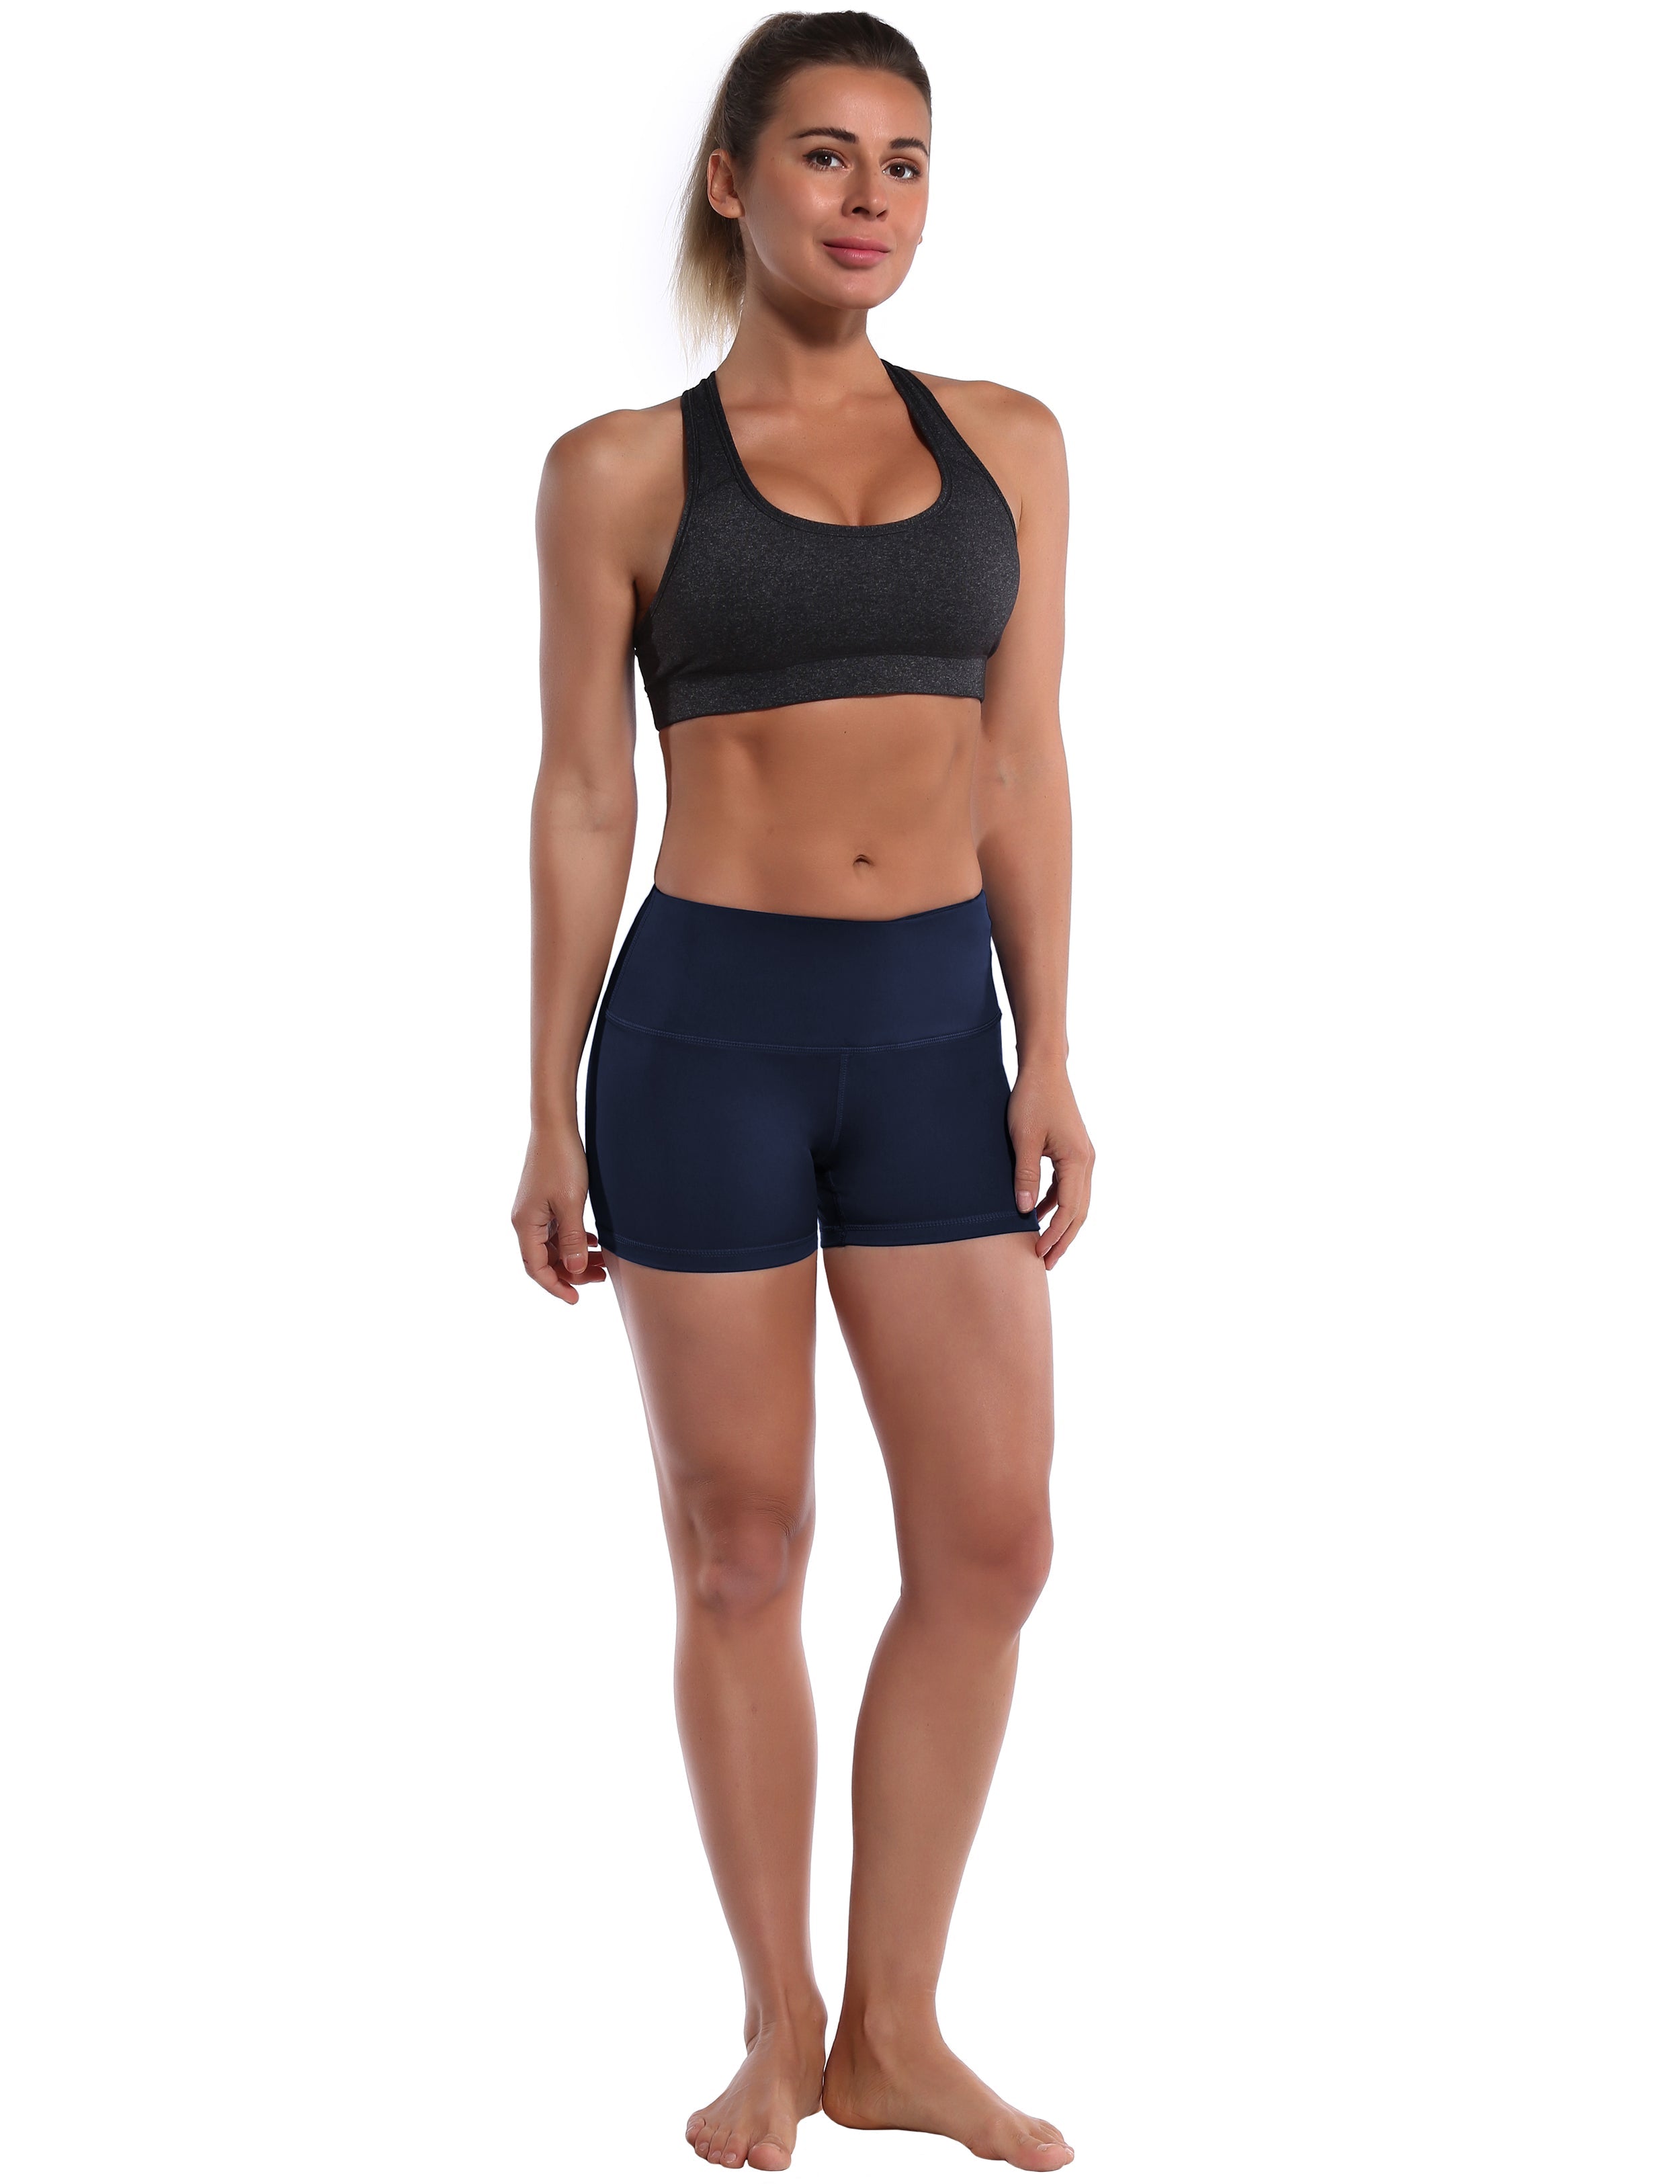 2.5" Running Shorts darknavy Softest-ever fabric High elasticity High density 4-way stretch Fabric doesn't attract lint easily No see-through Moisture-wicking Machine wash 75% Nylon, 25% Spandex